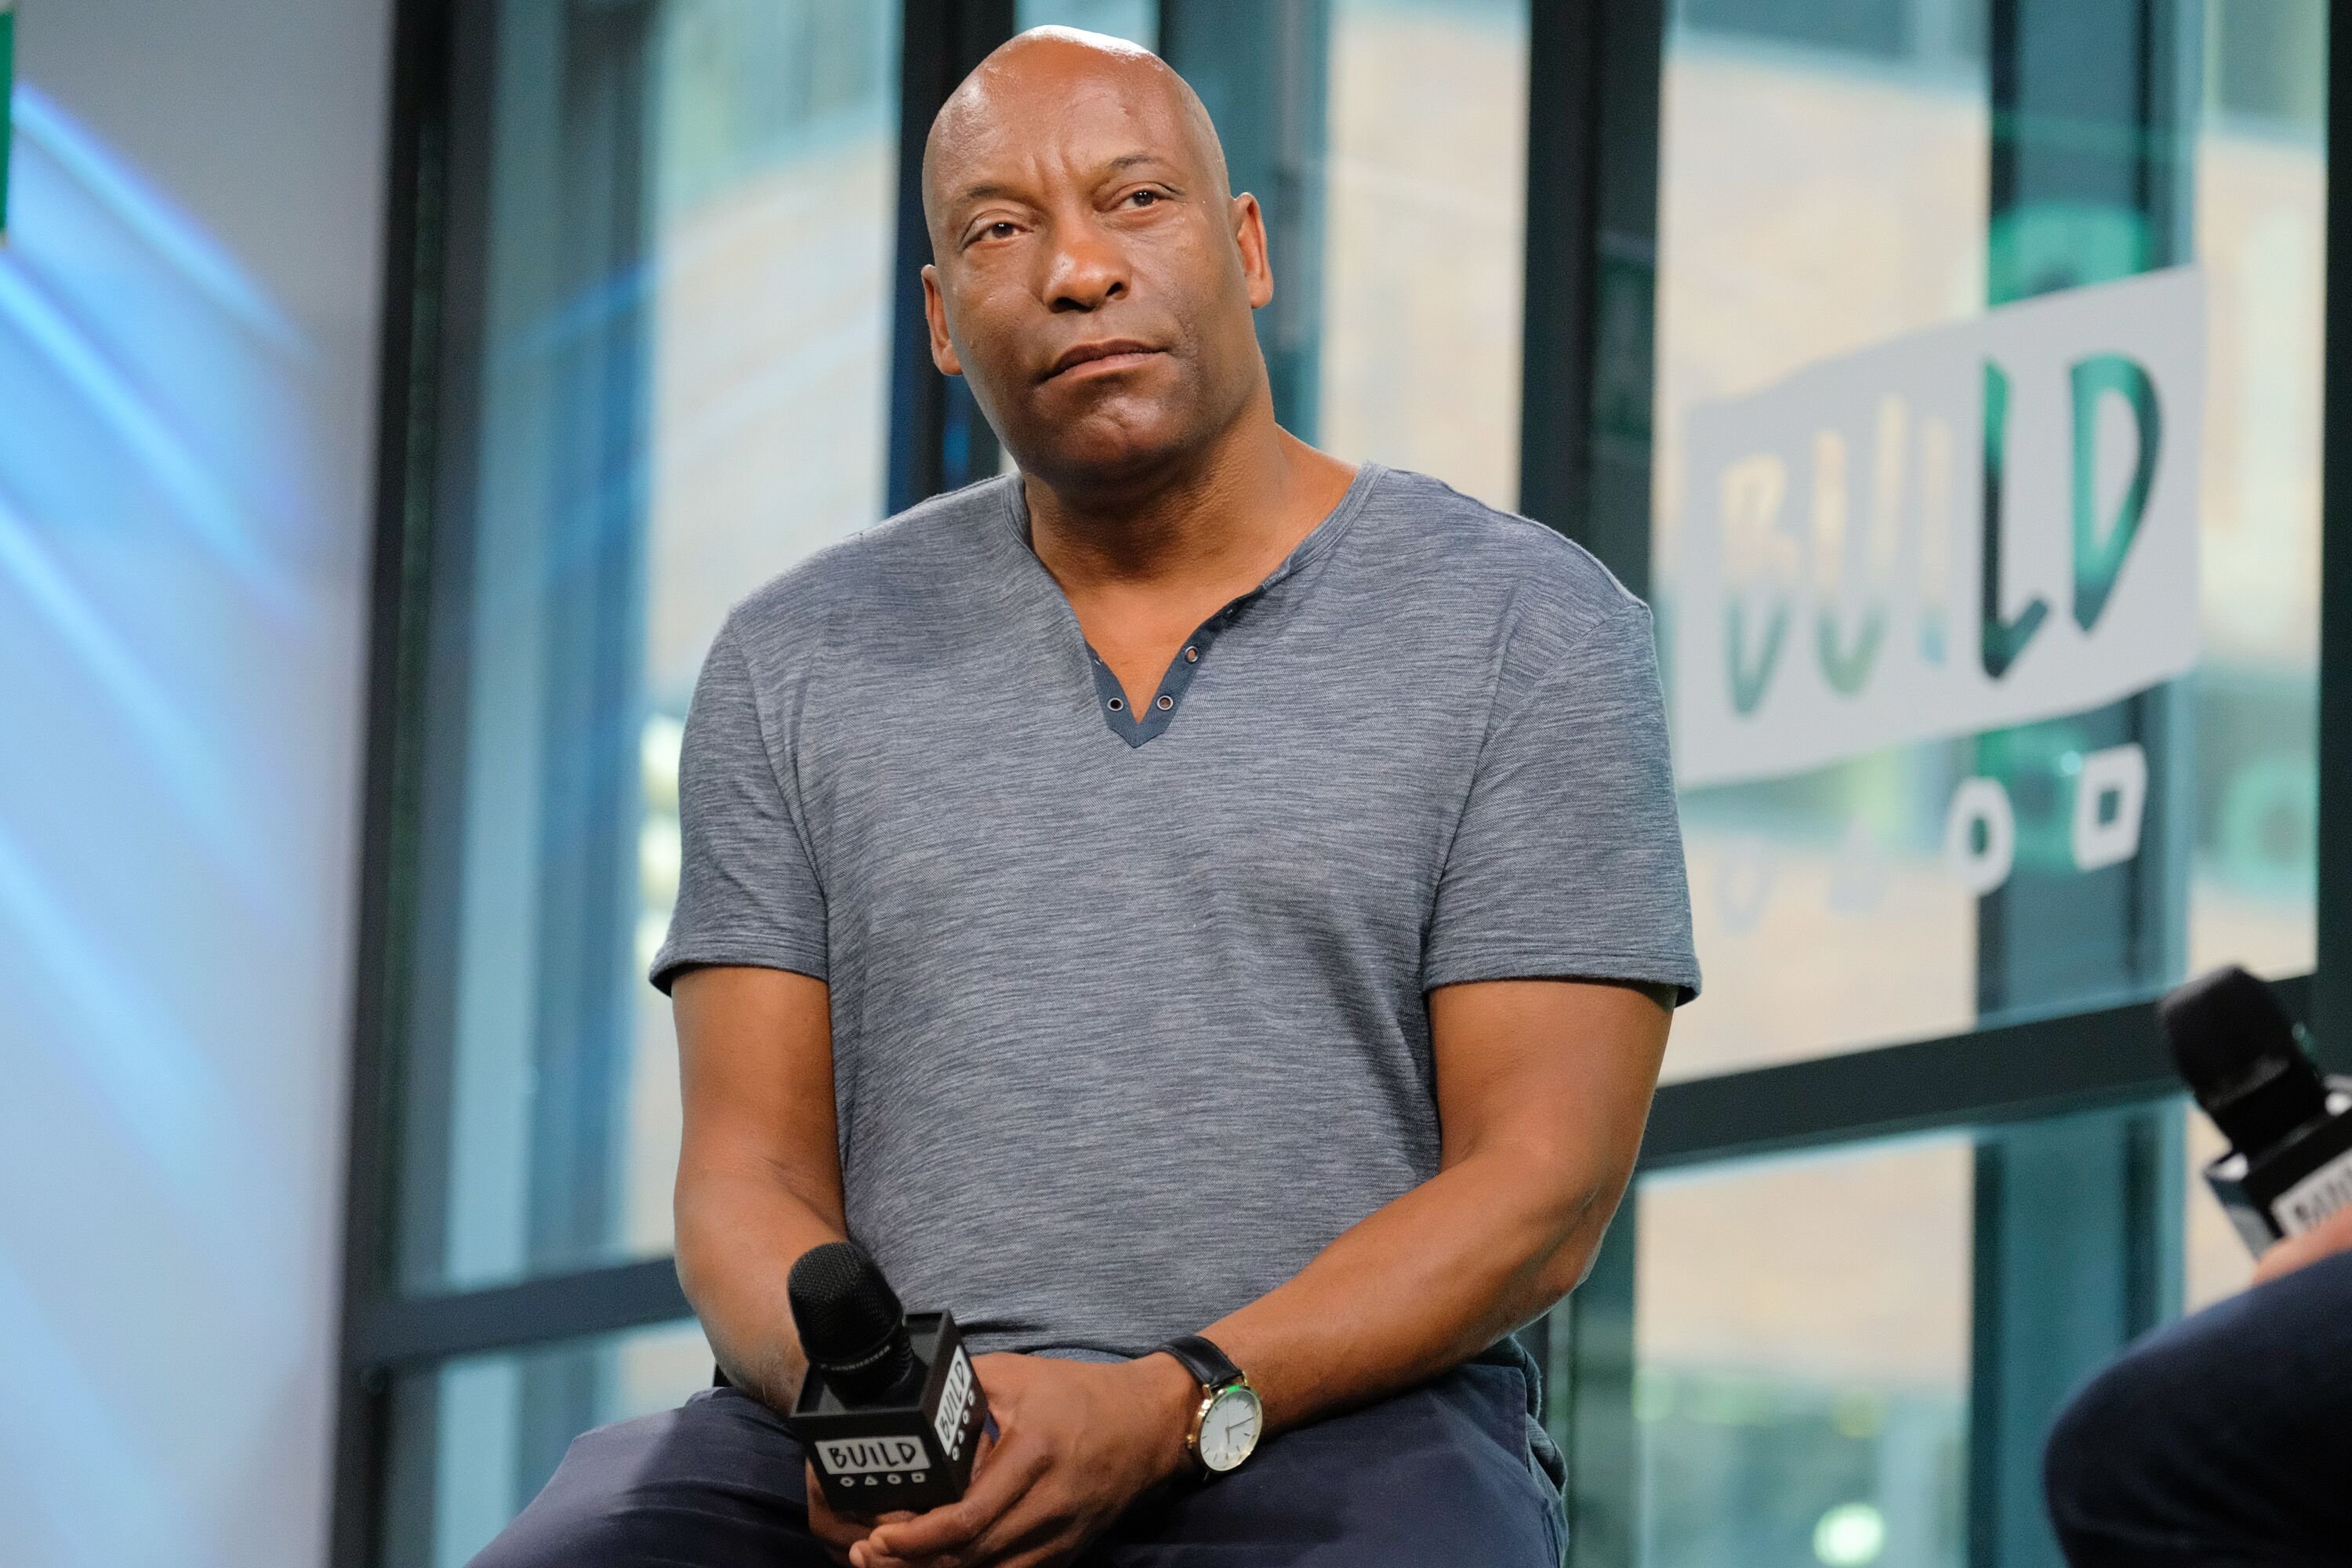 John Singleton at a guesting | Source: Getty Images/GlobalImagesUkraine